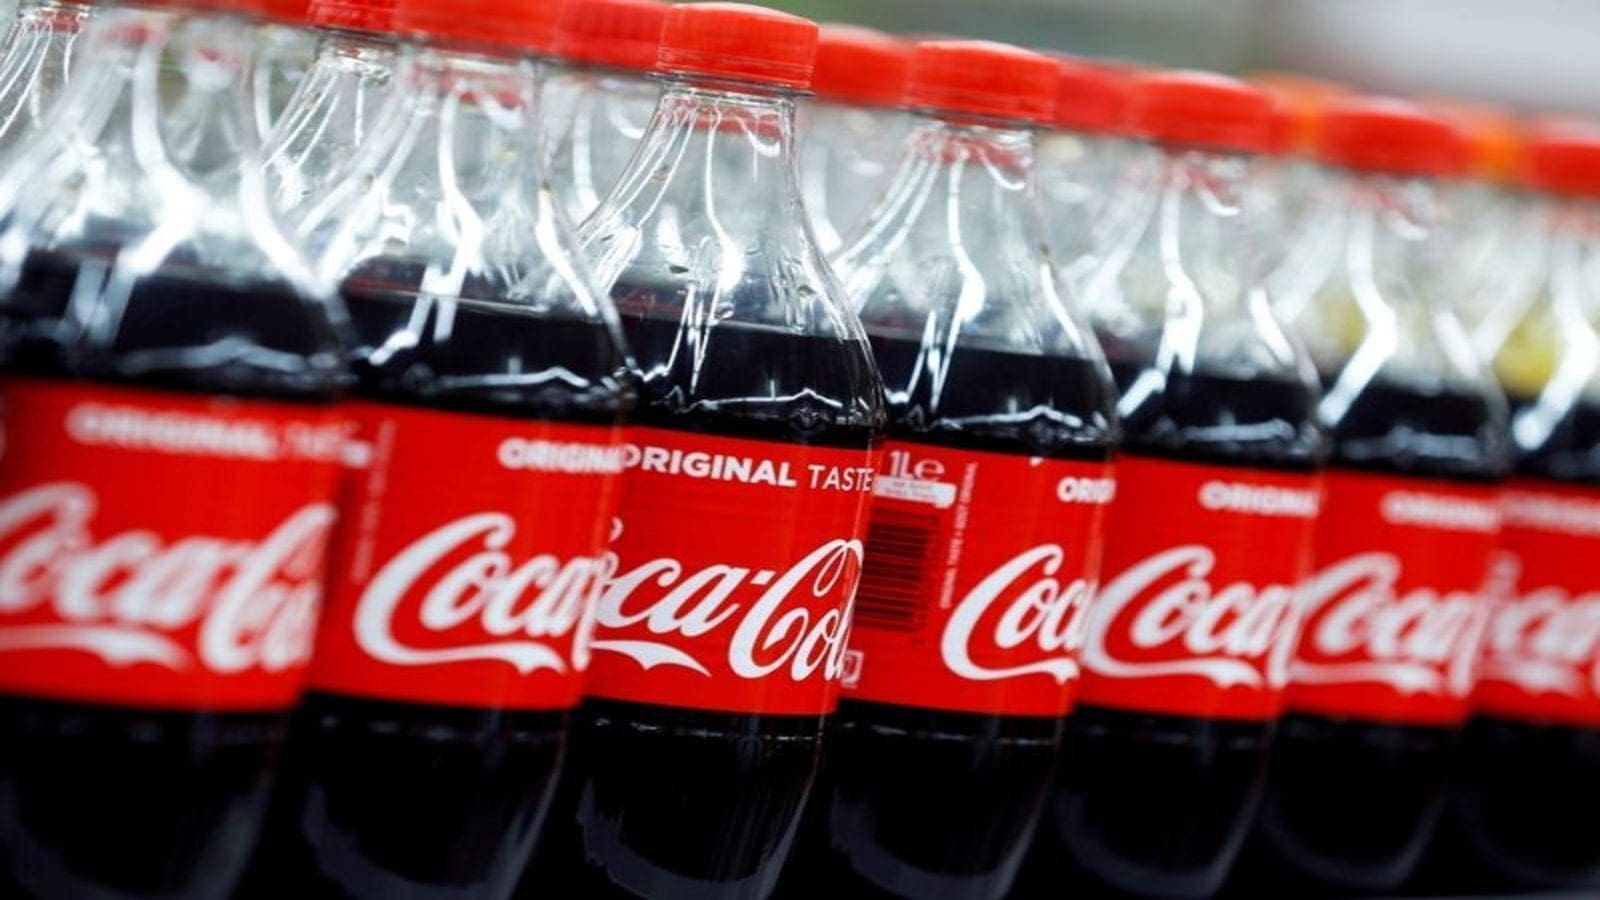 Swiss-based Coca-Cola bottler HBC records 88% jump in half year profits buoyed by recovery in out of home consumption